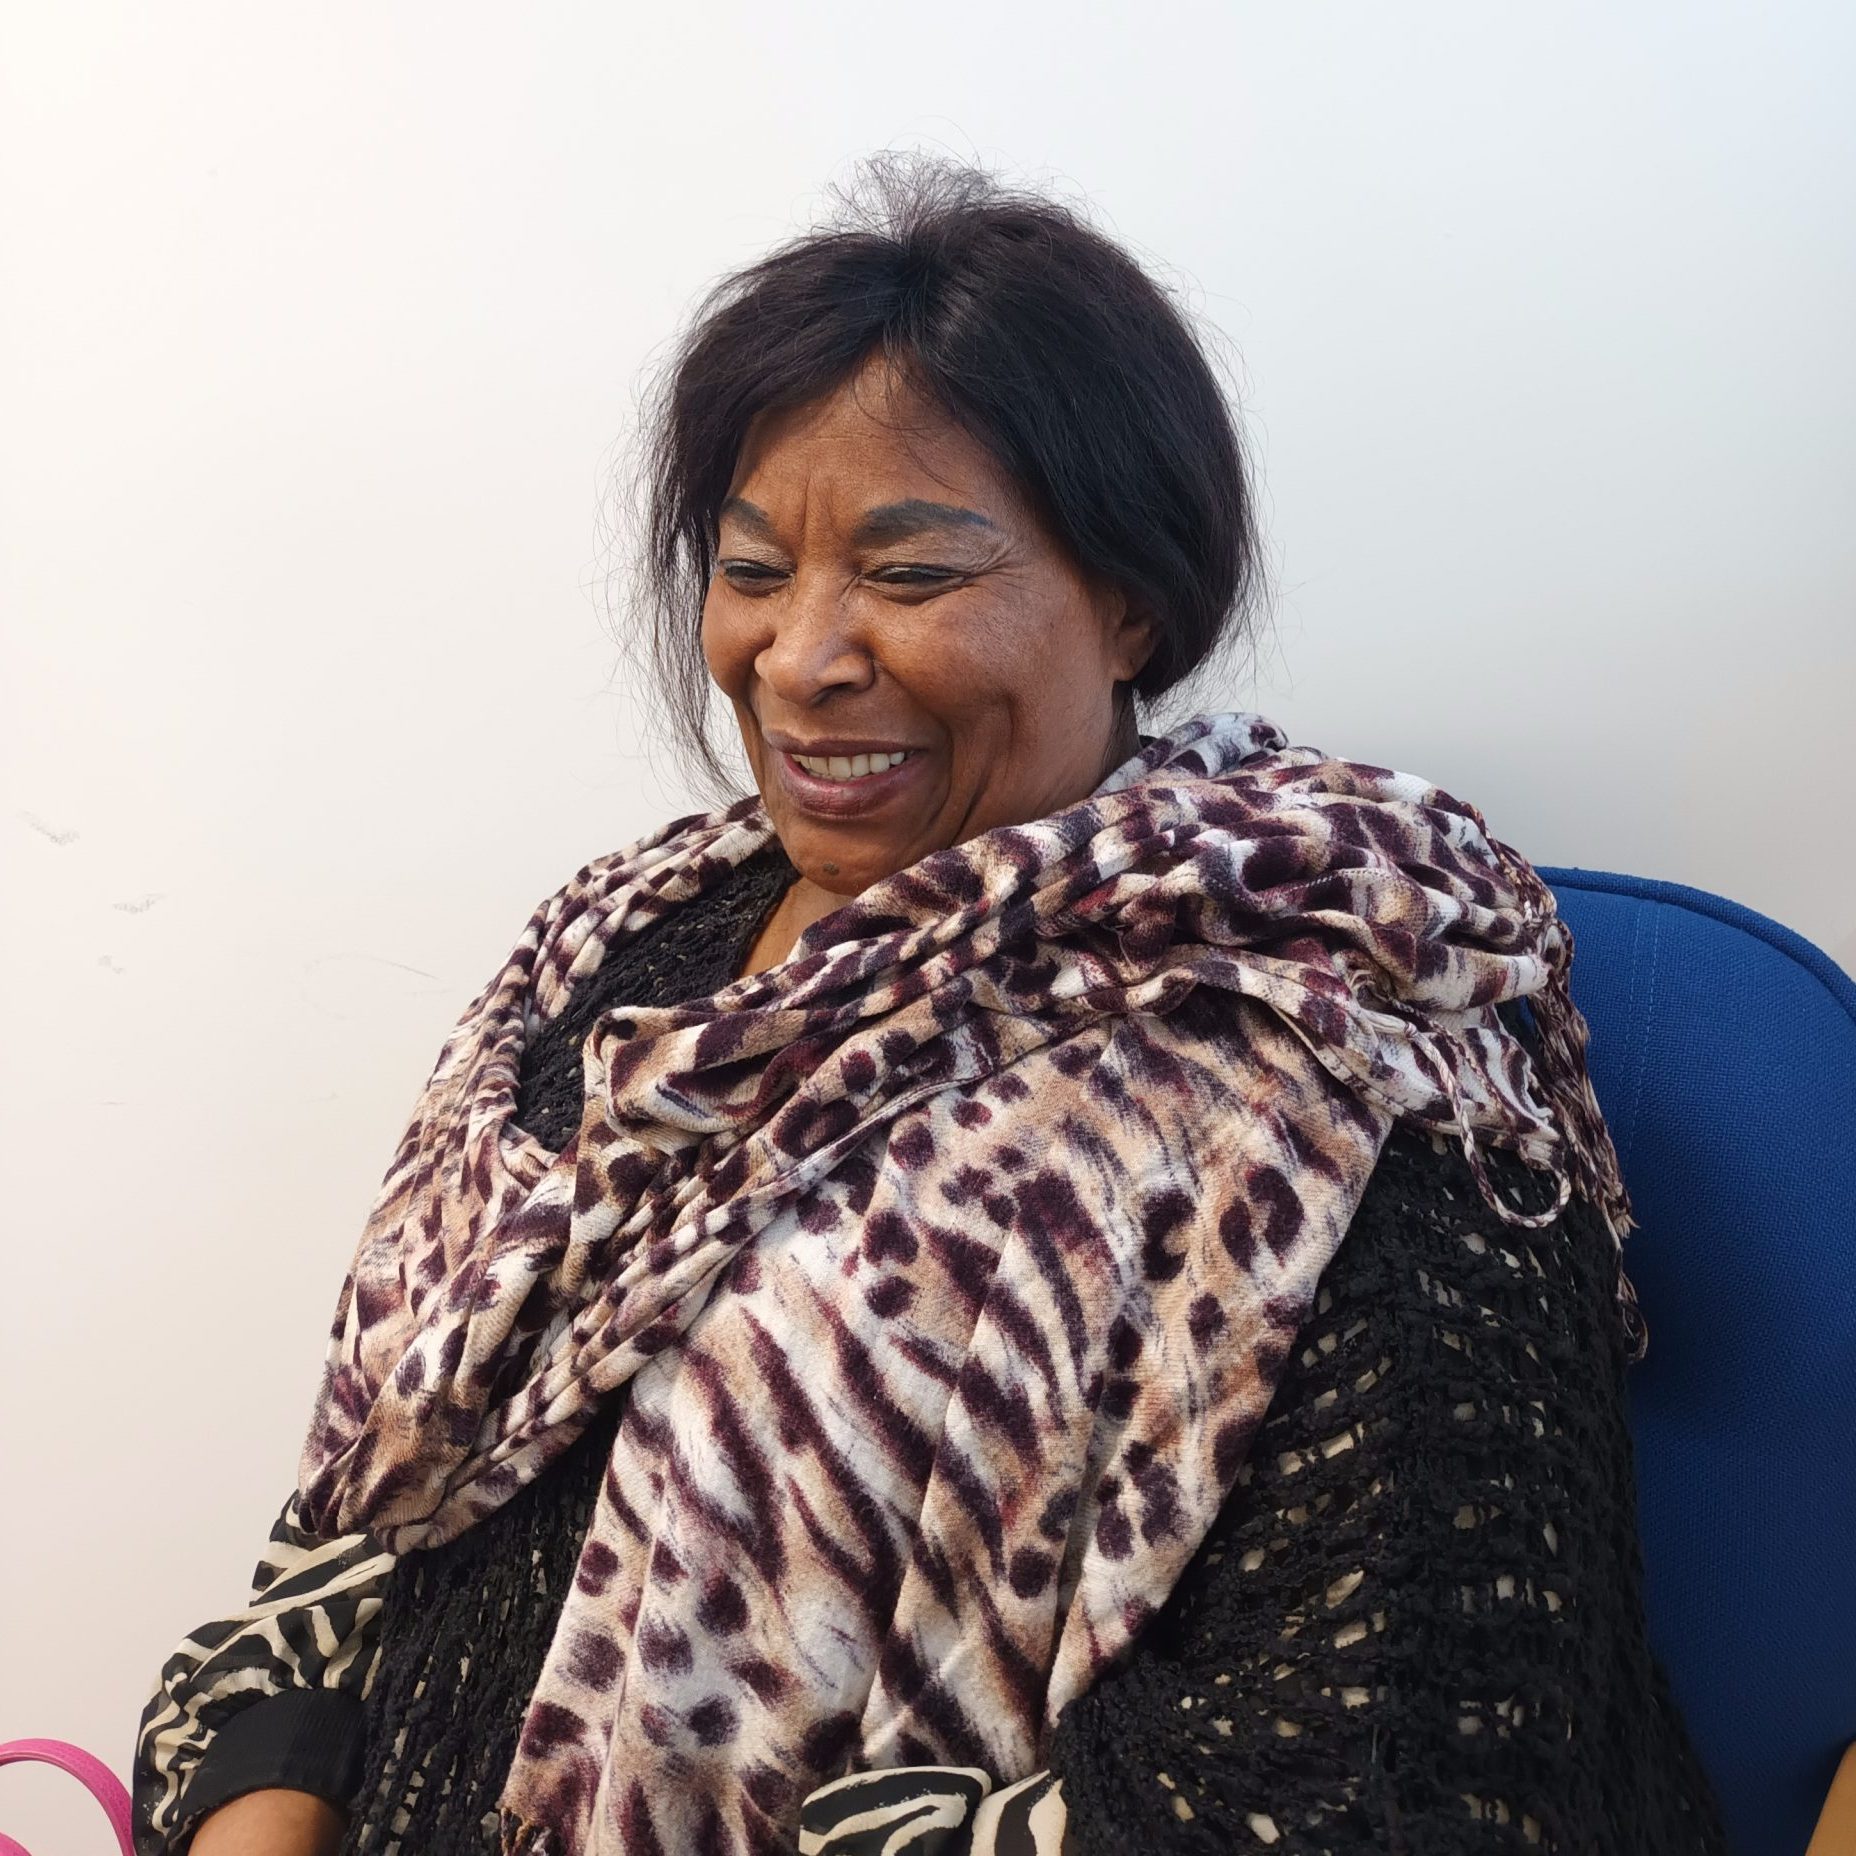 Volunteer mary is sat at an office desk with a big smile. She has black hair which is tied back and is wearing a black long sleeved top with a purple and white shawl wrapped around her.